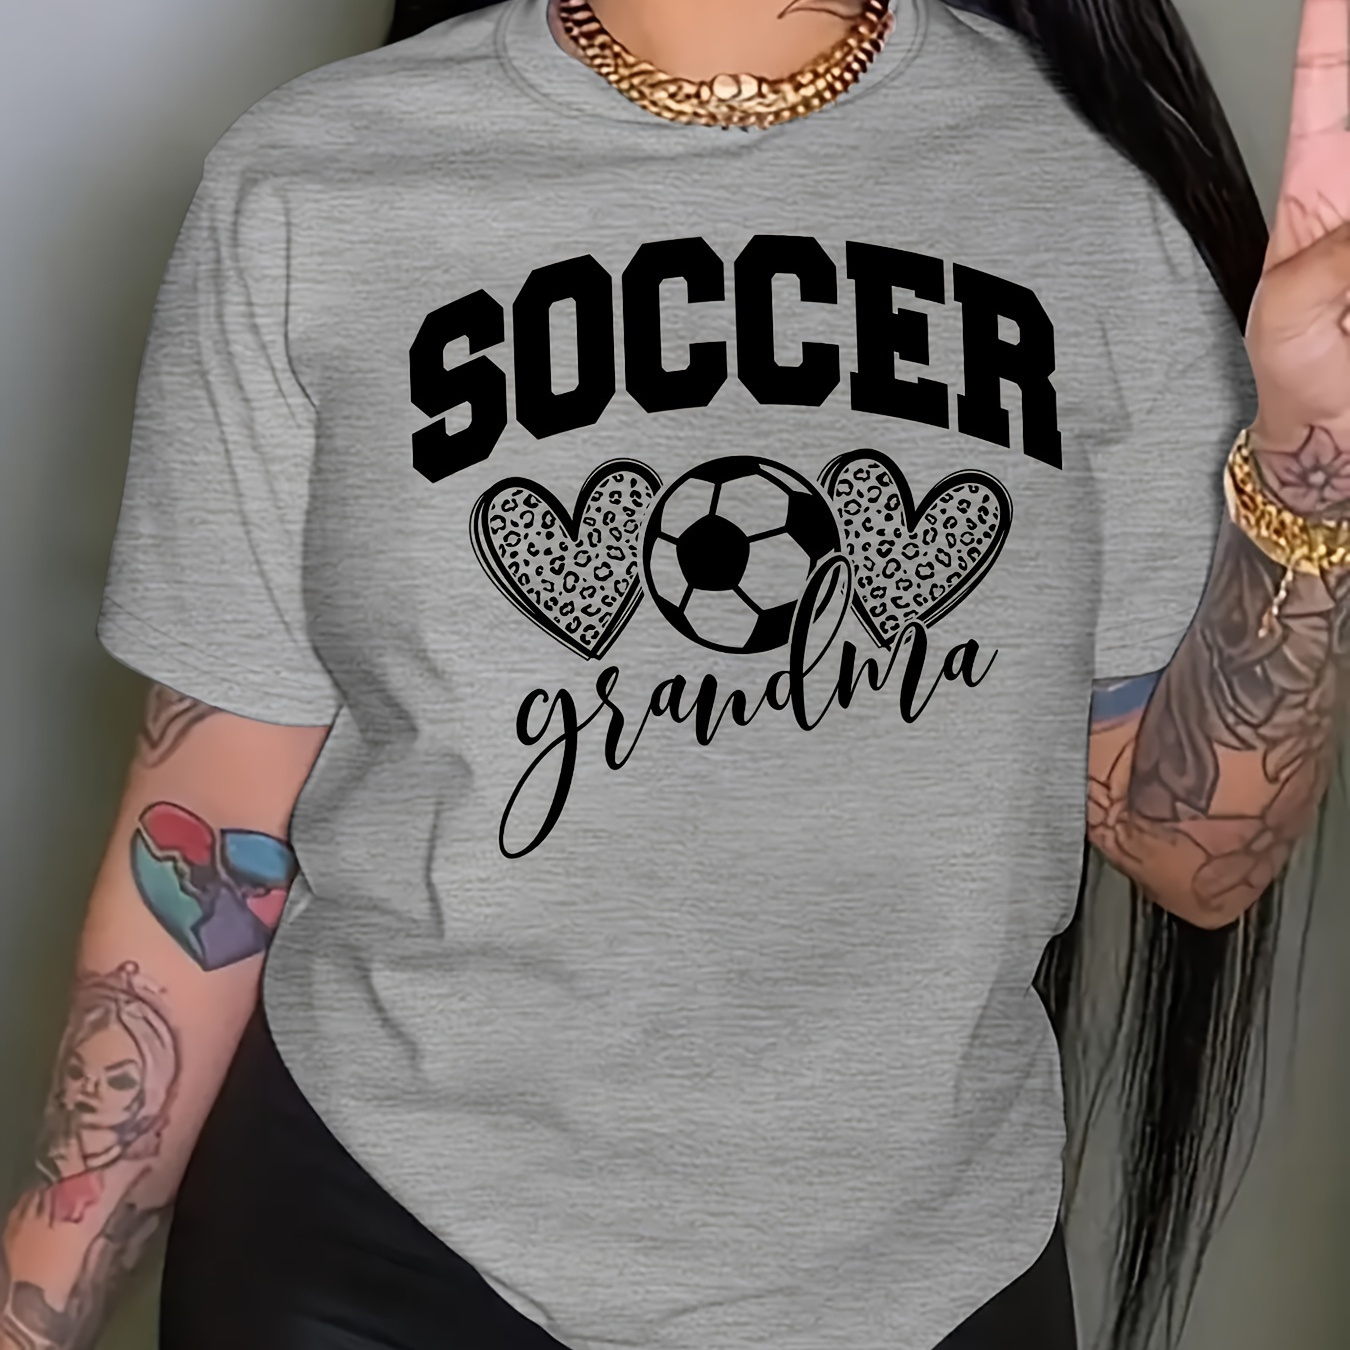 

Soccer Print Crew Neck T-shirt, Casual Short Sleeve Top For Spring & Summer, Women's Clothing